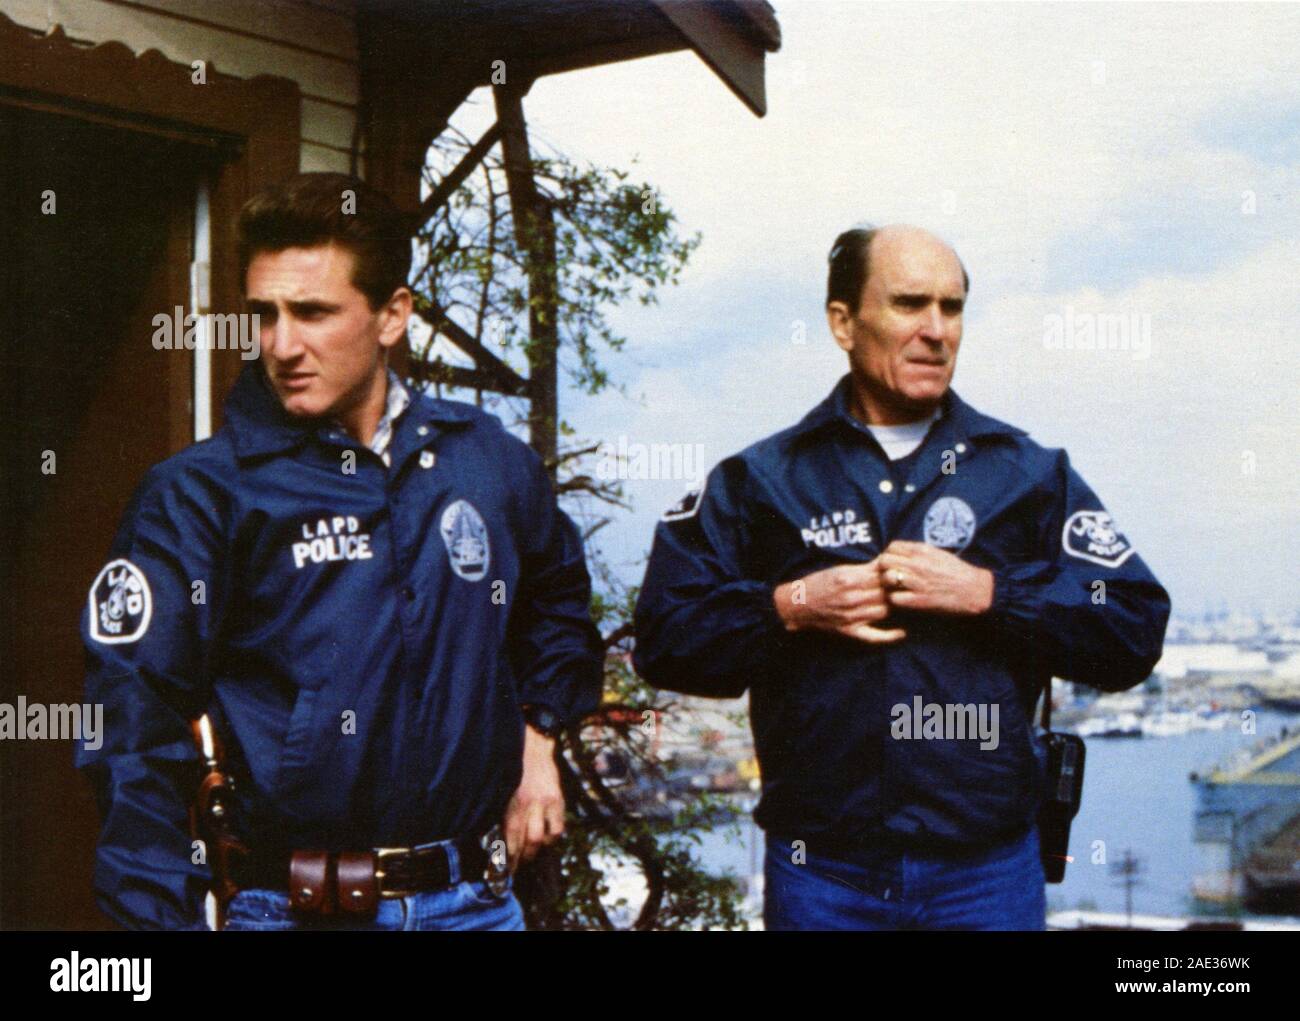 ROBERT DUVALL and SEAN PENN in COLORS (1988), directed by DENNIS HOPPER. Credit: ORION PICTURES / Album Stock Photo